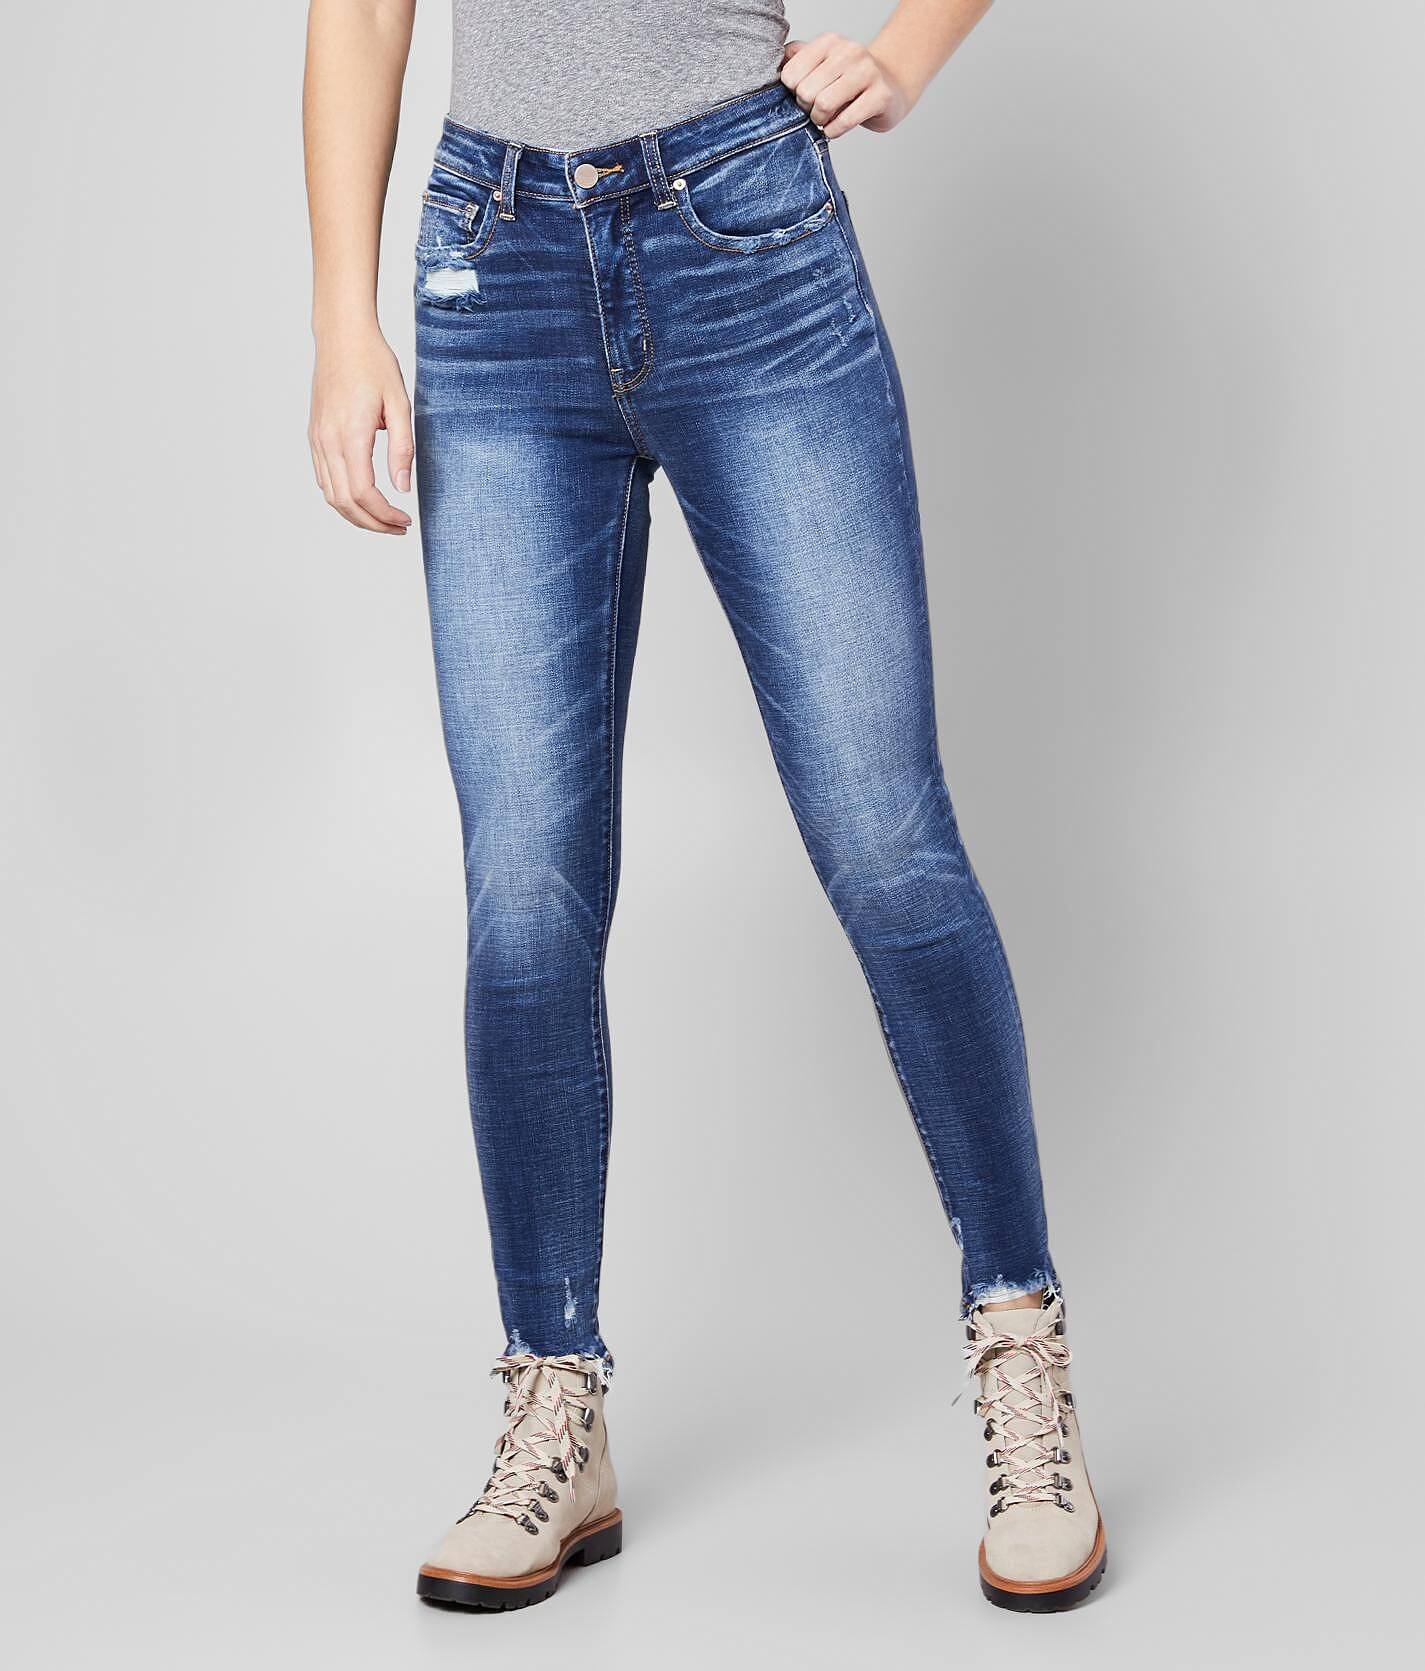 ankle rise jeans